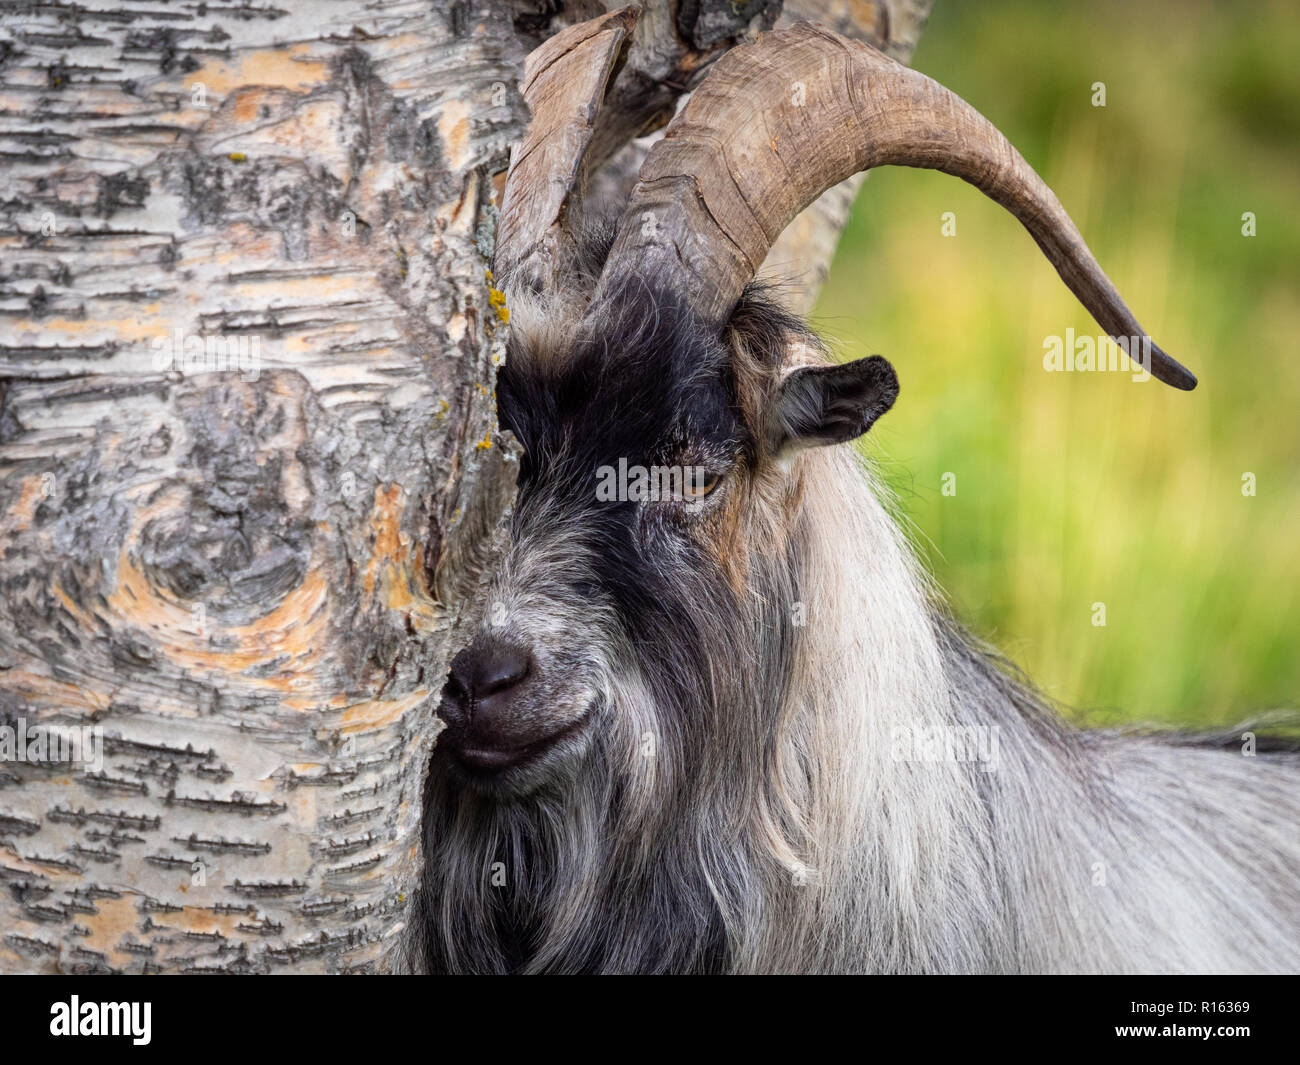 Billy Goat eye contact. Stock Photo